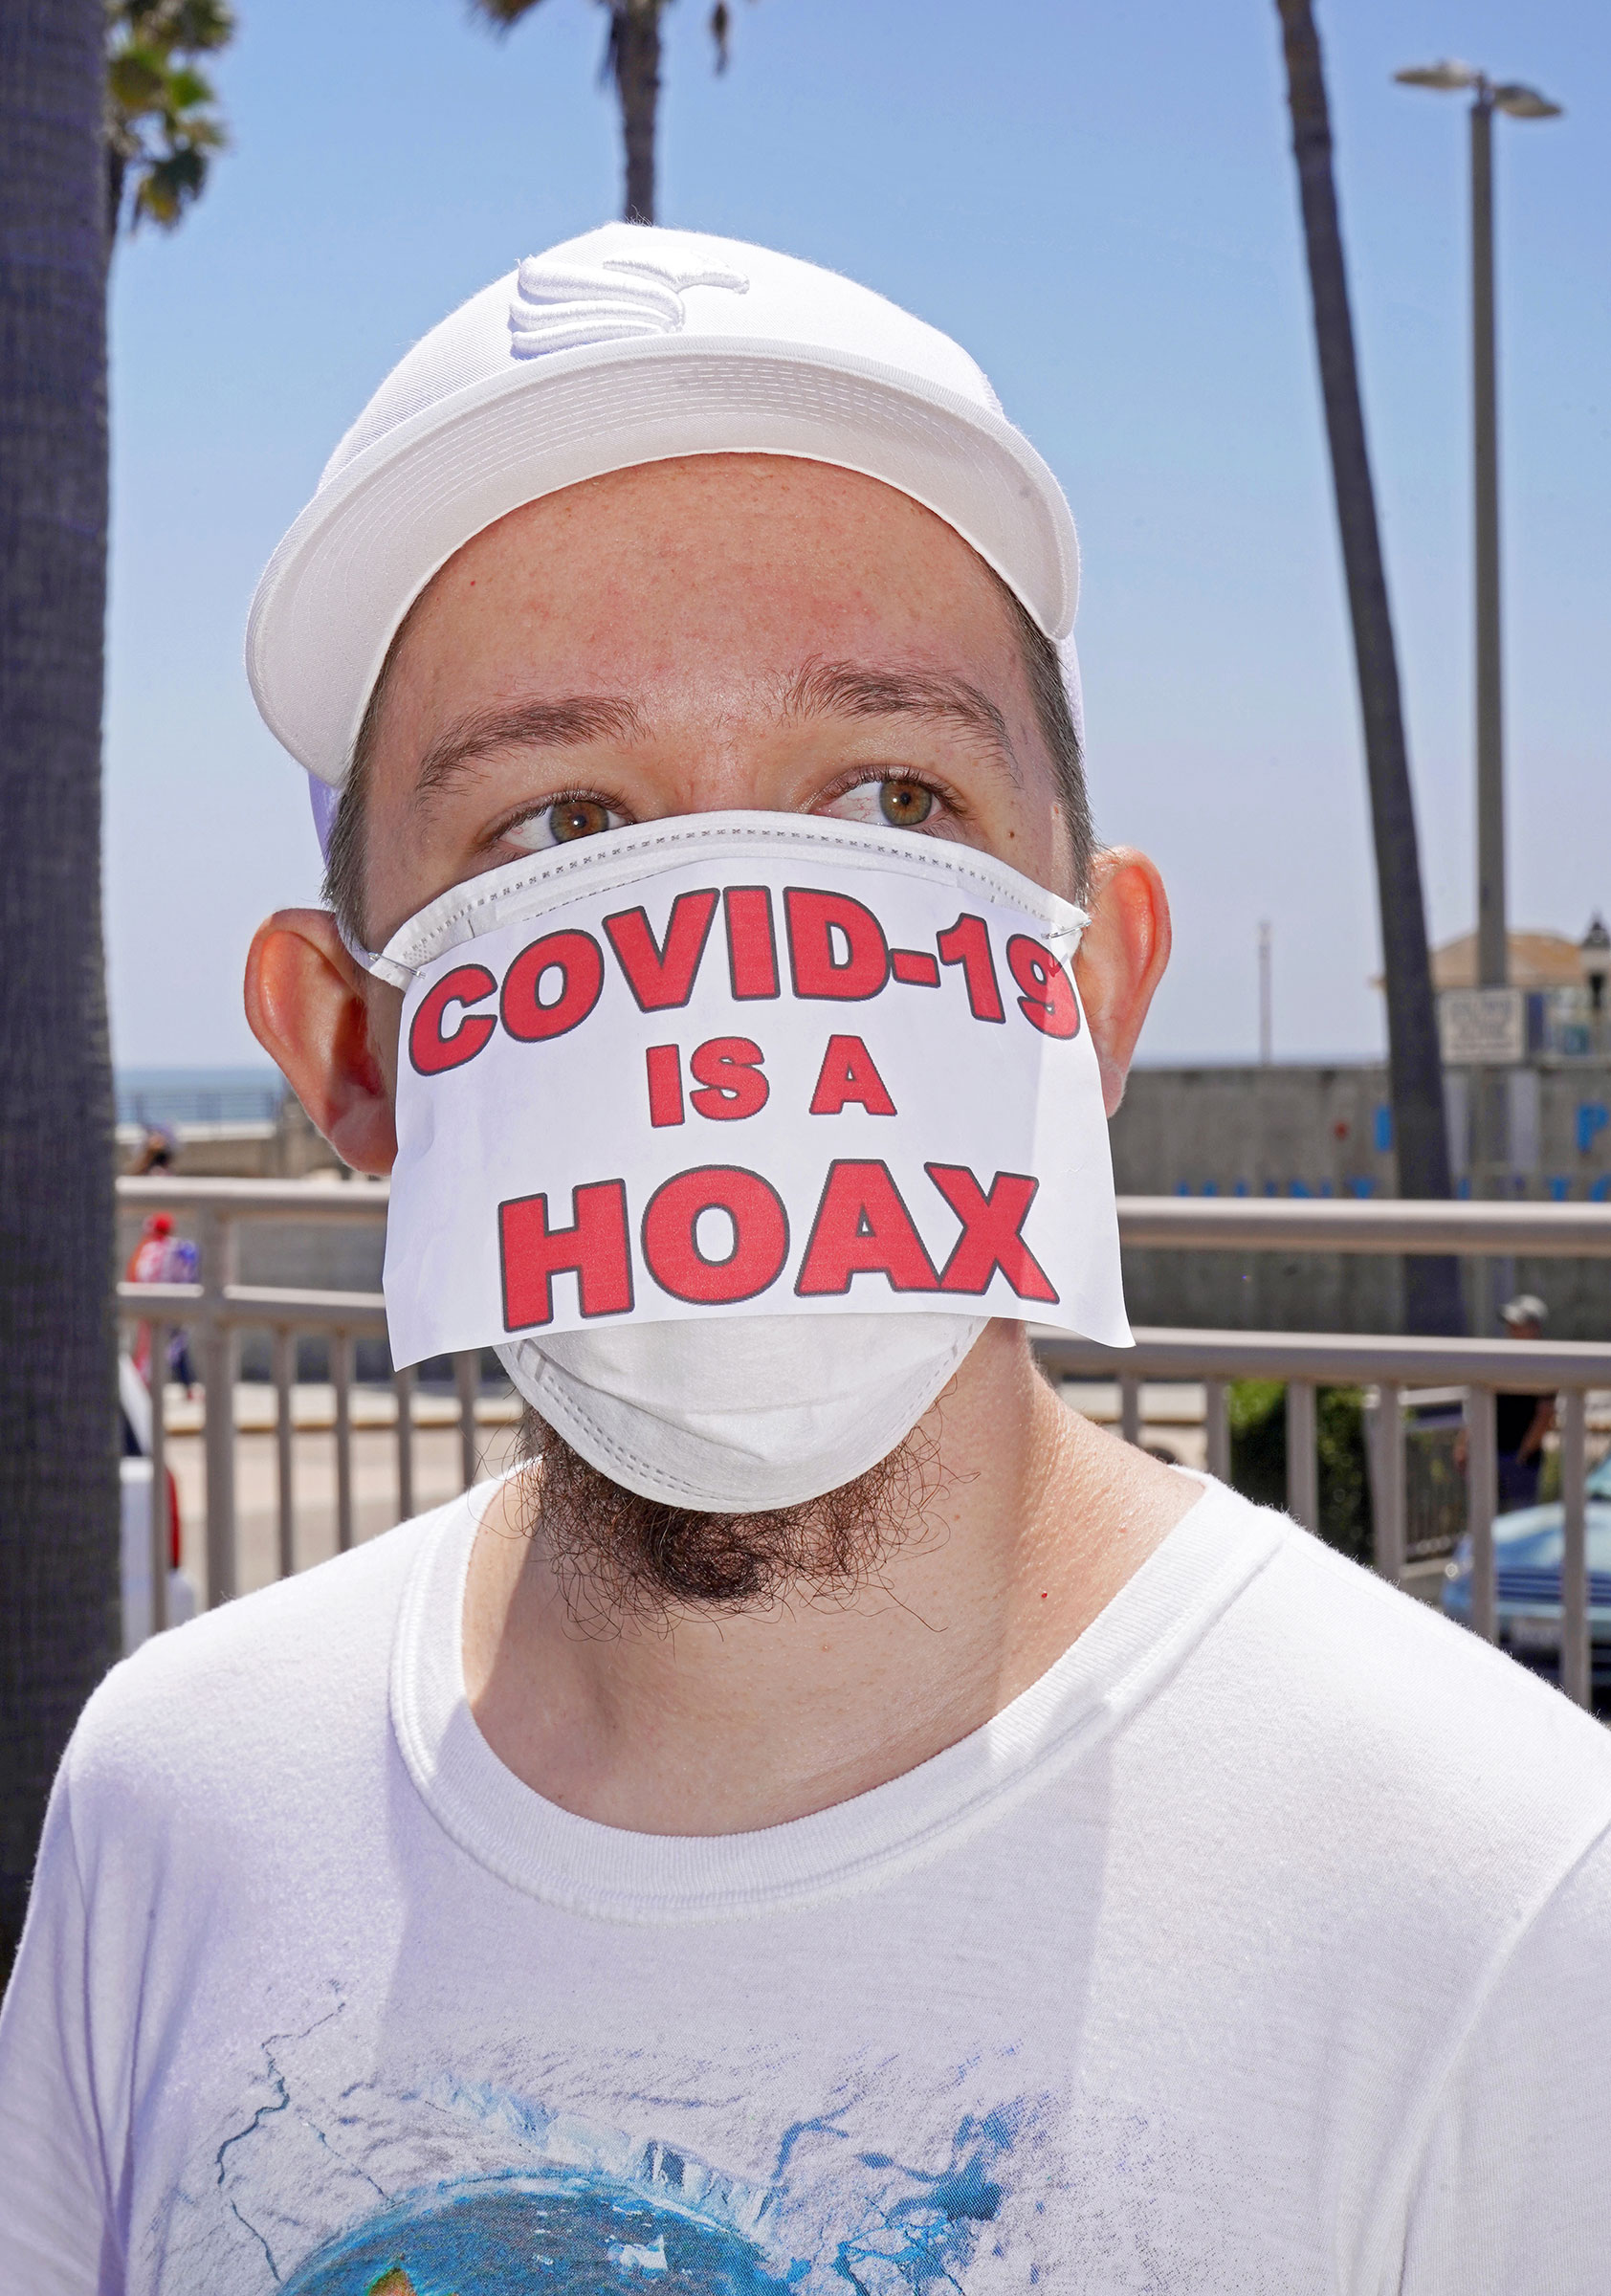 Conspiracy theories and misinformation on display at anti-lockdown rally in Huntington Beach, Calif., May 1, 2020. (Jamie Lee Curtis Taete)